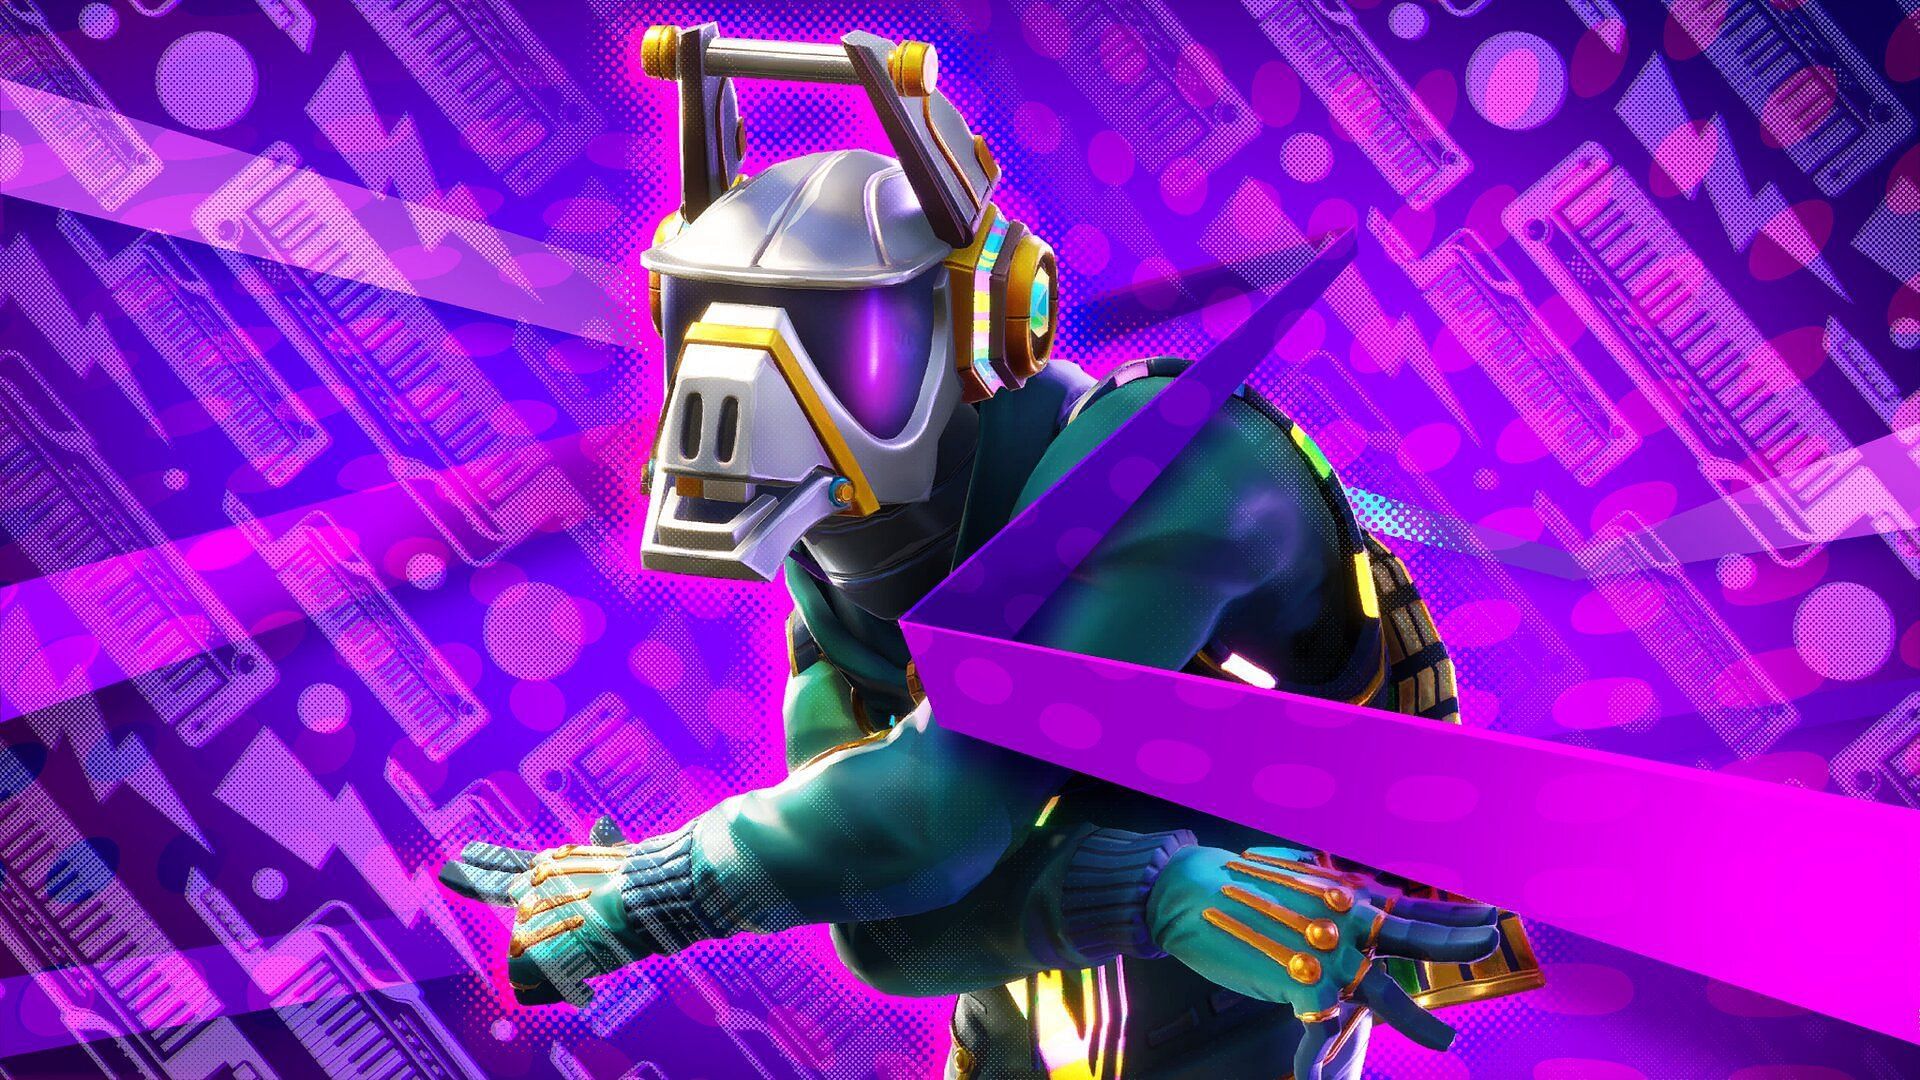 Fortnite movement to be increased in a few weeks, Epic Games confirms